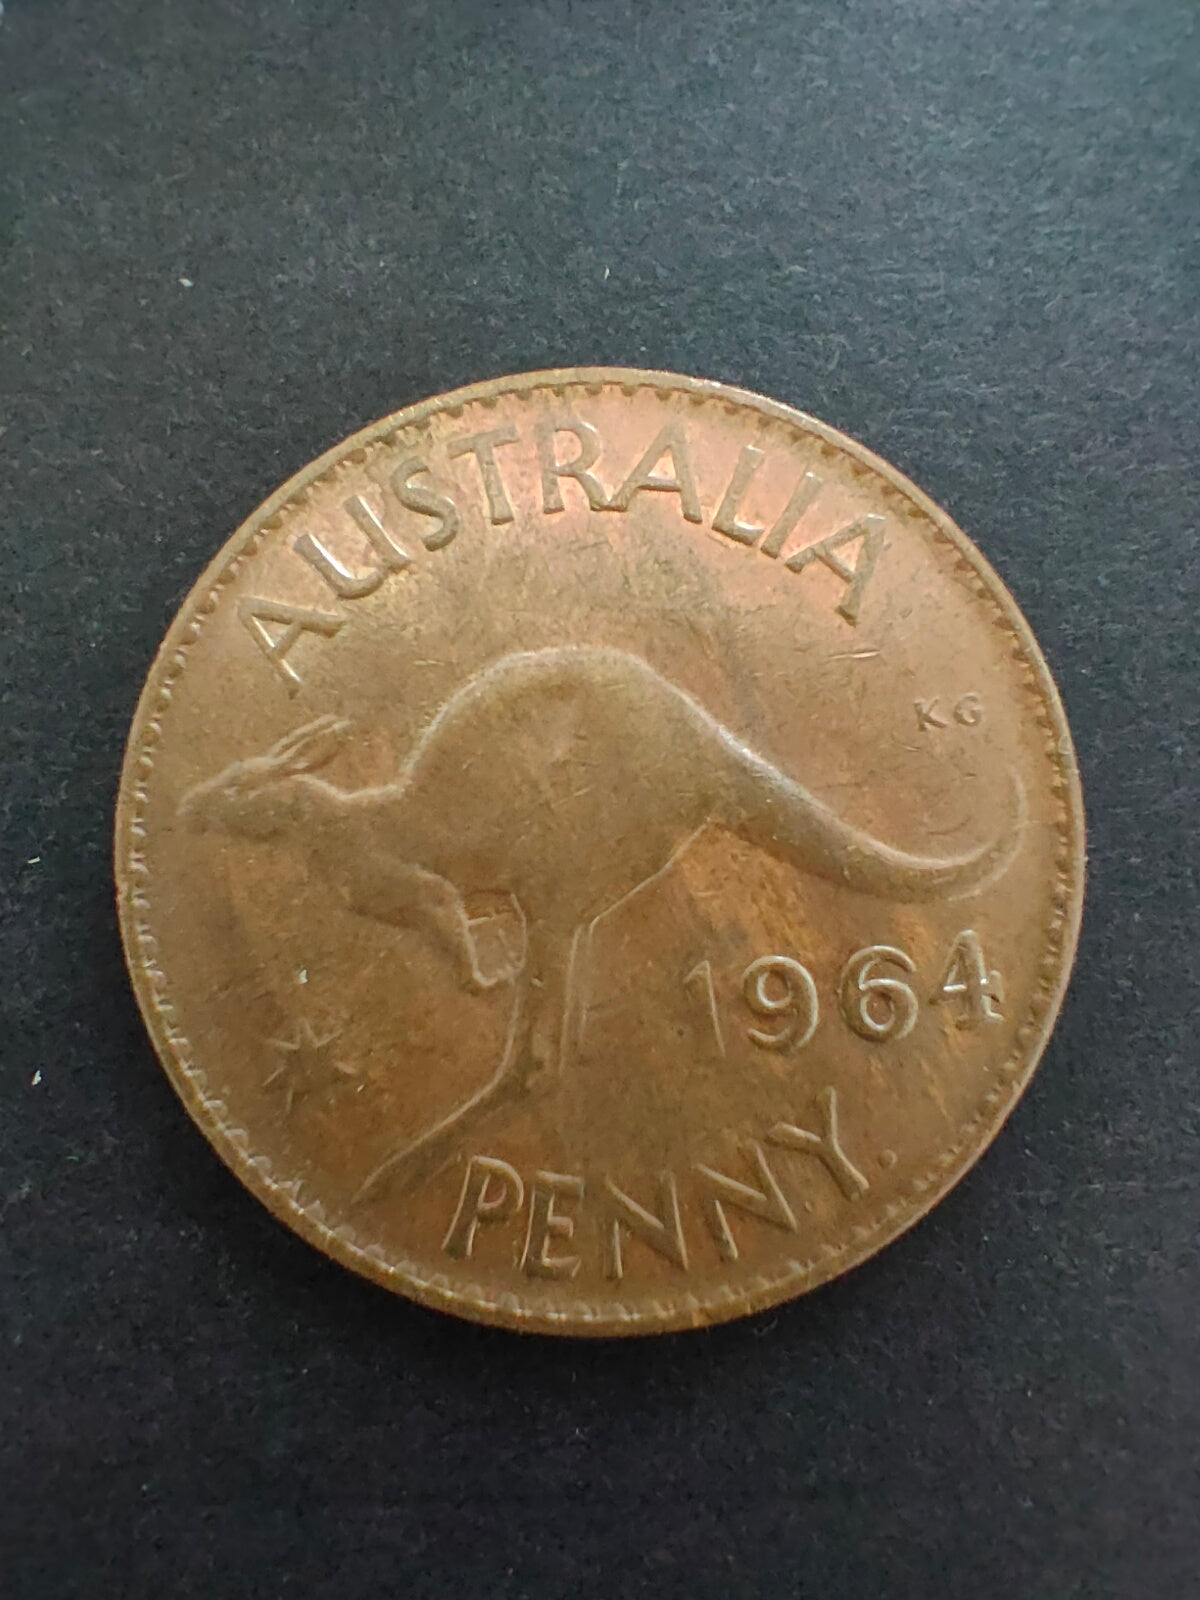 Australia 1964Y 1d One Penny Extremely Fine Condition. Perth Mint